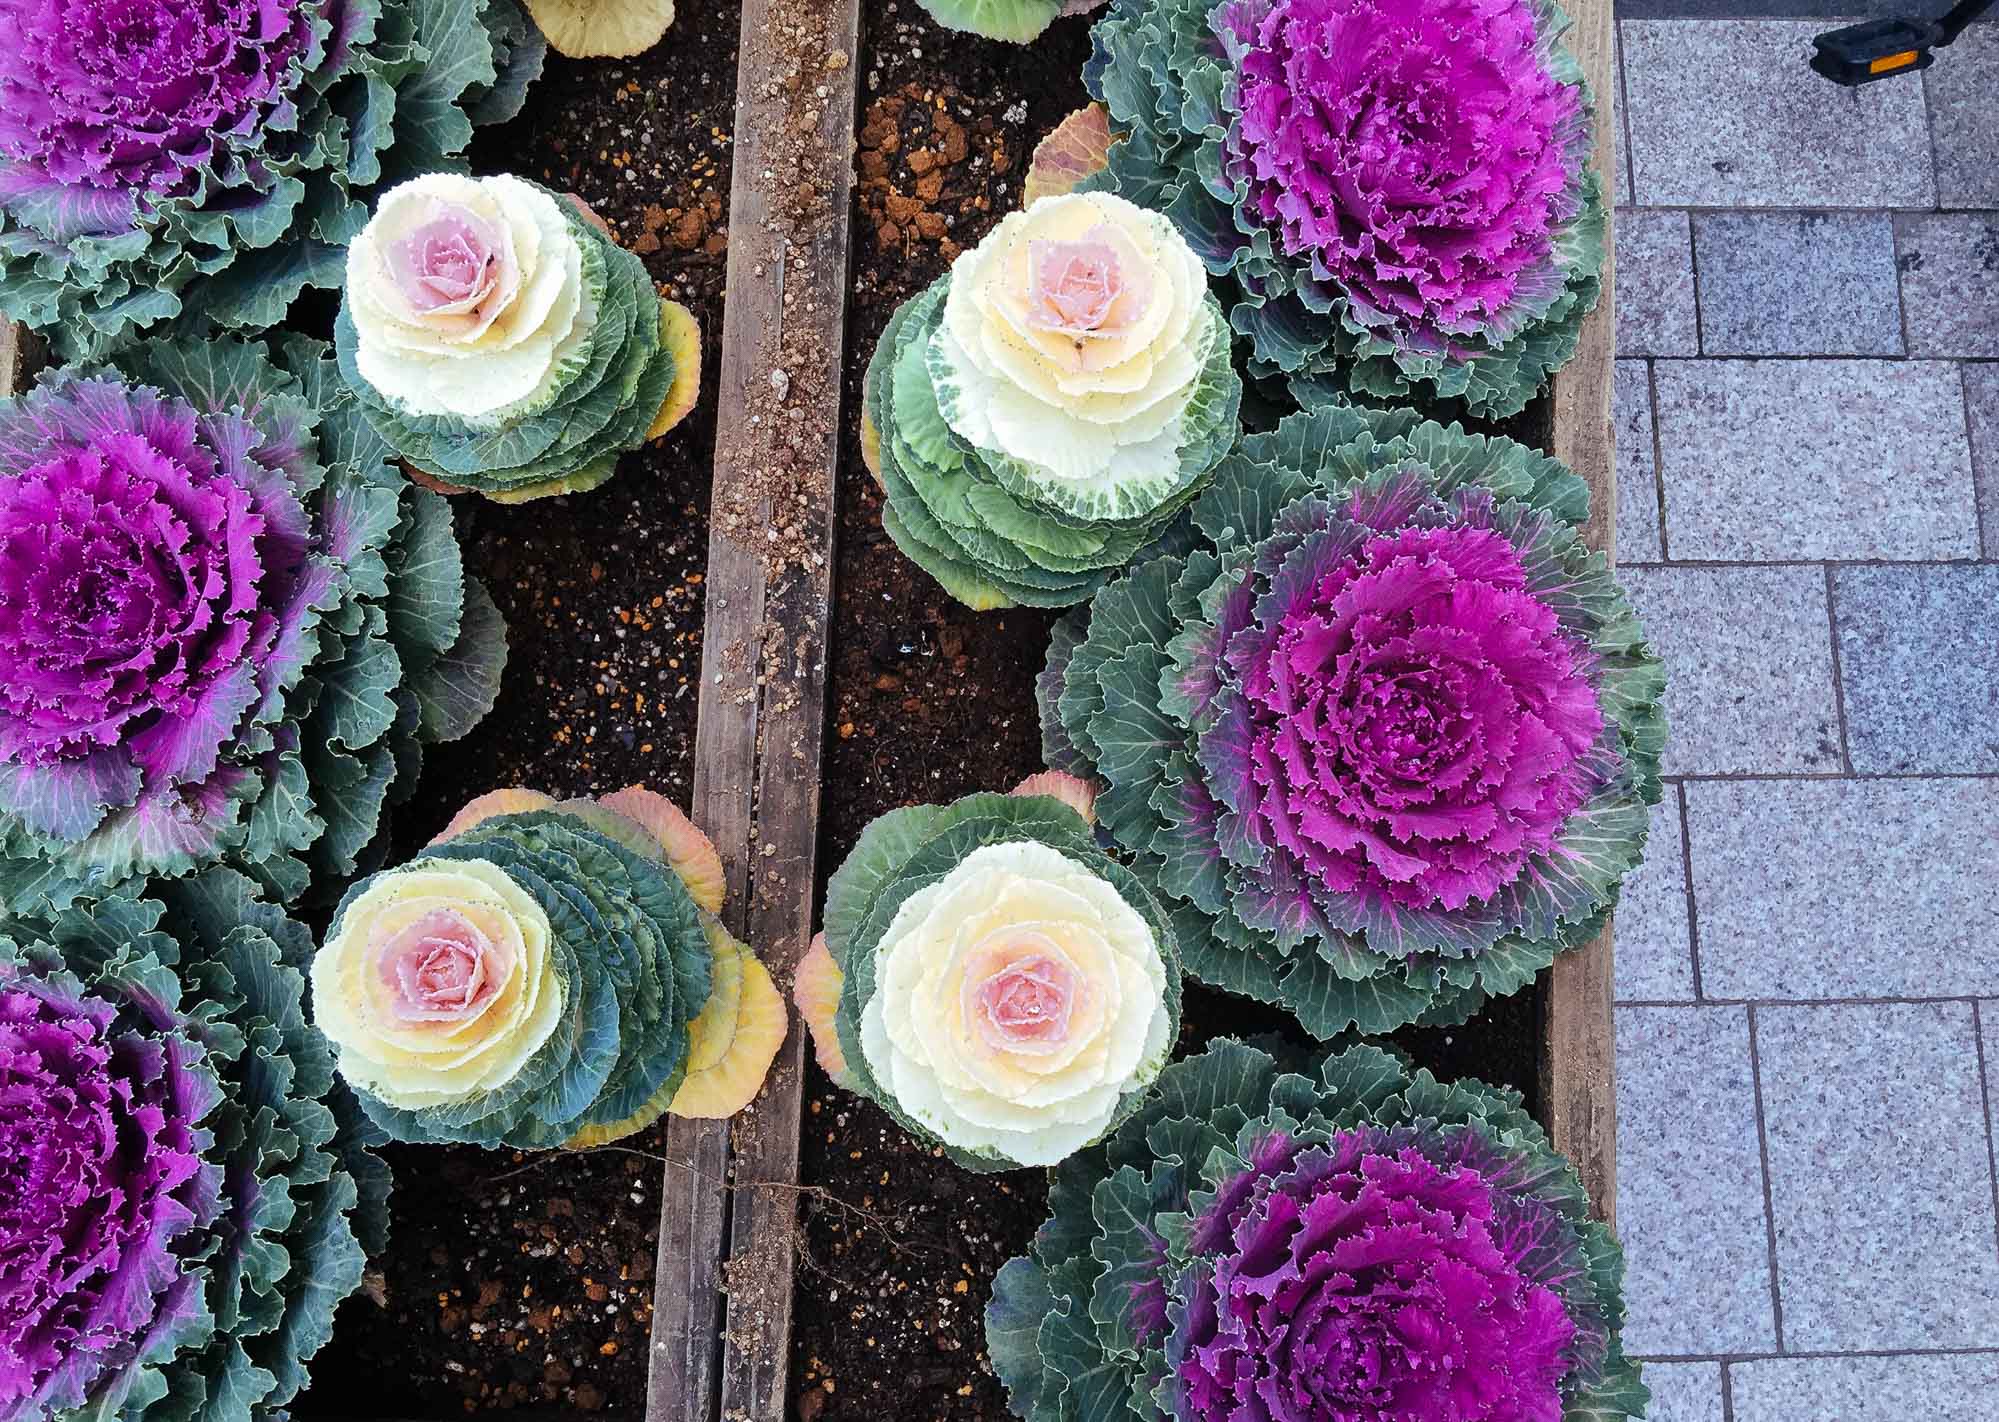 Planning a trip to Japan - cabbage flowers